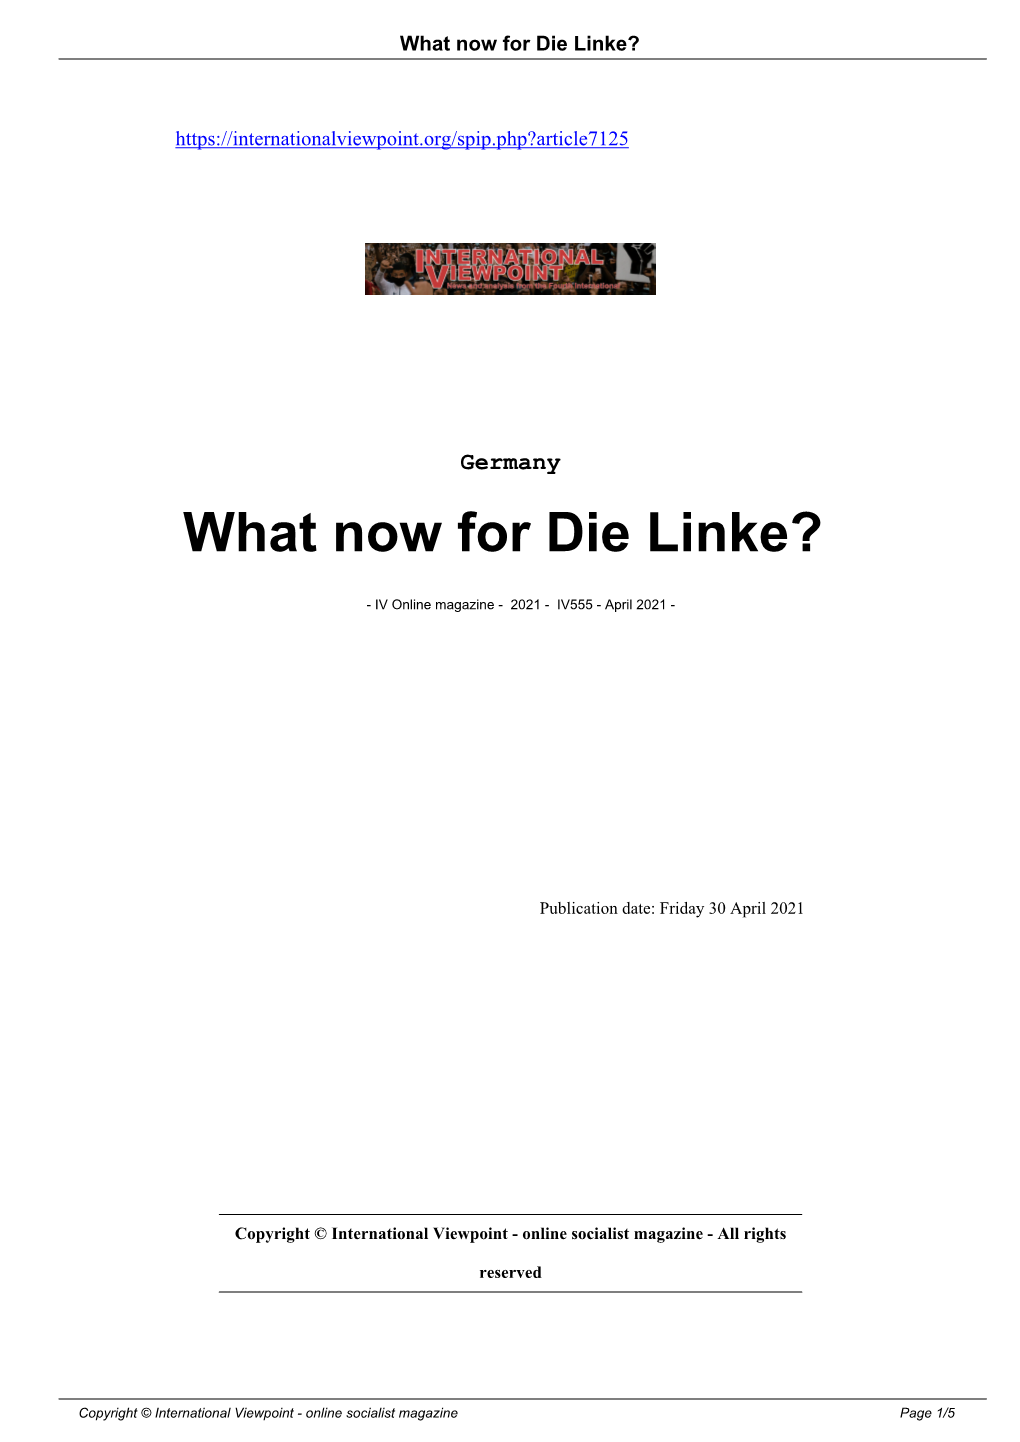 What Now for Die Linke?